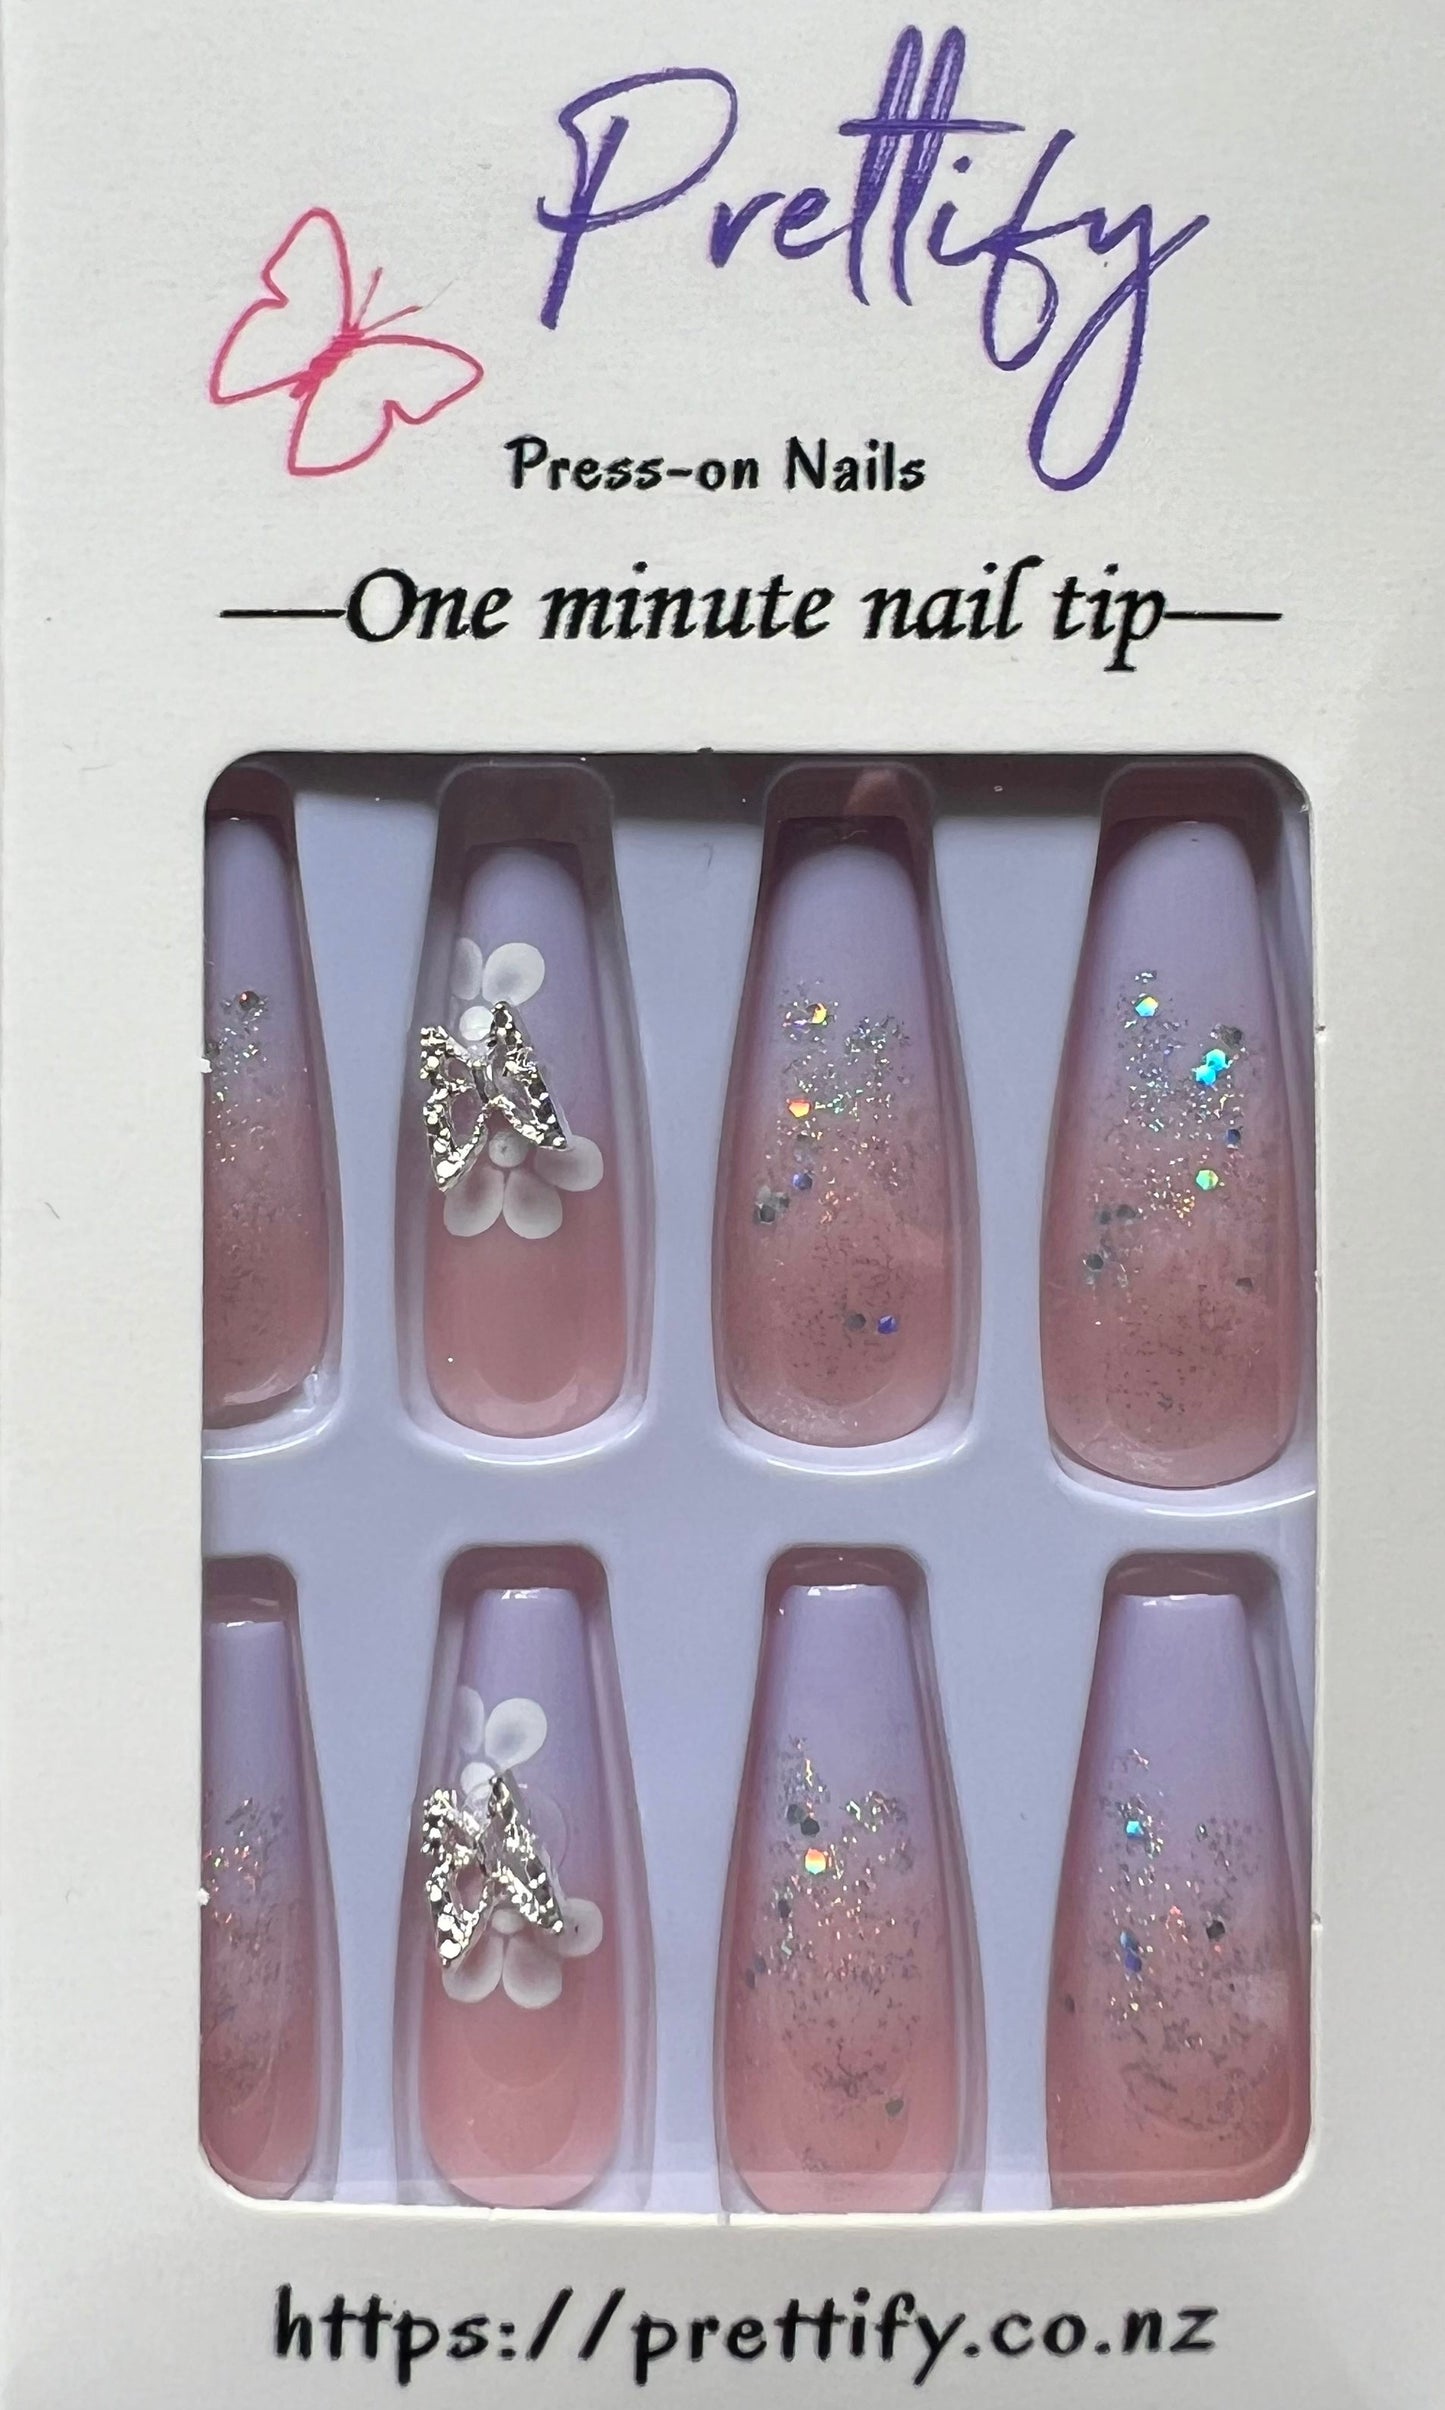 Lilac & Pale Pink with Glitter, Silver 3D Butterflies & White Flowers - Coffin Press on Nails #640